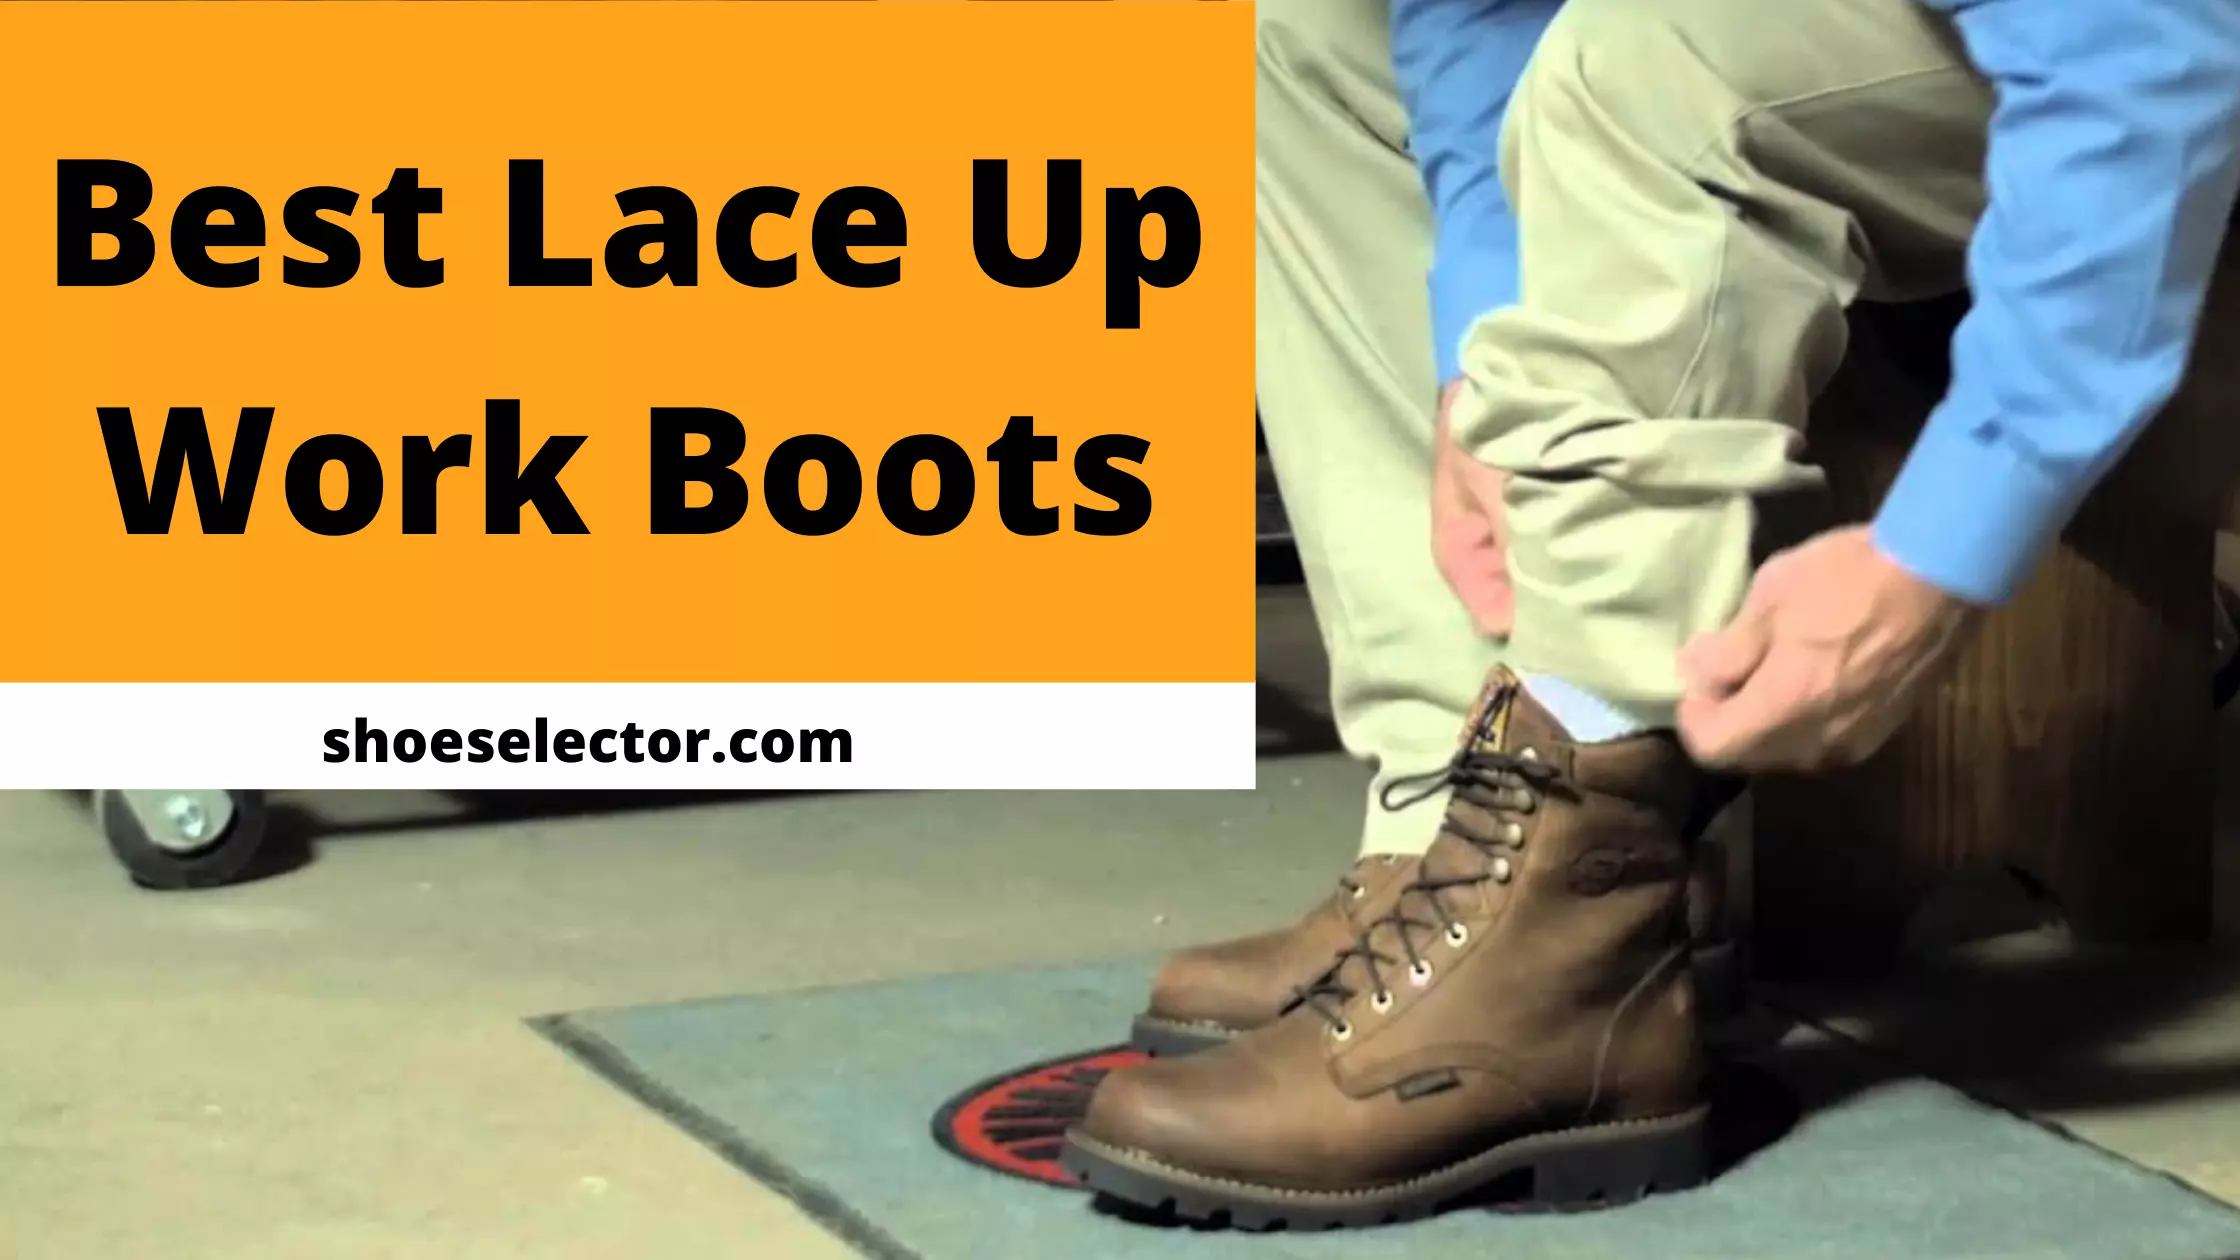 Best Lace Up Work Boots With Shopping Tips And Reviews